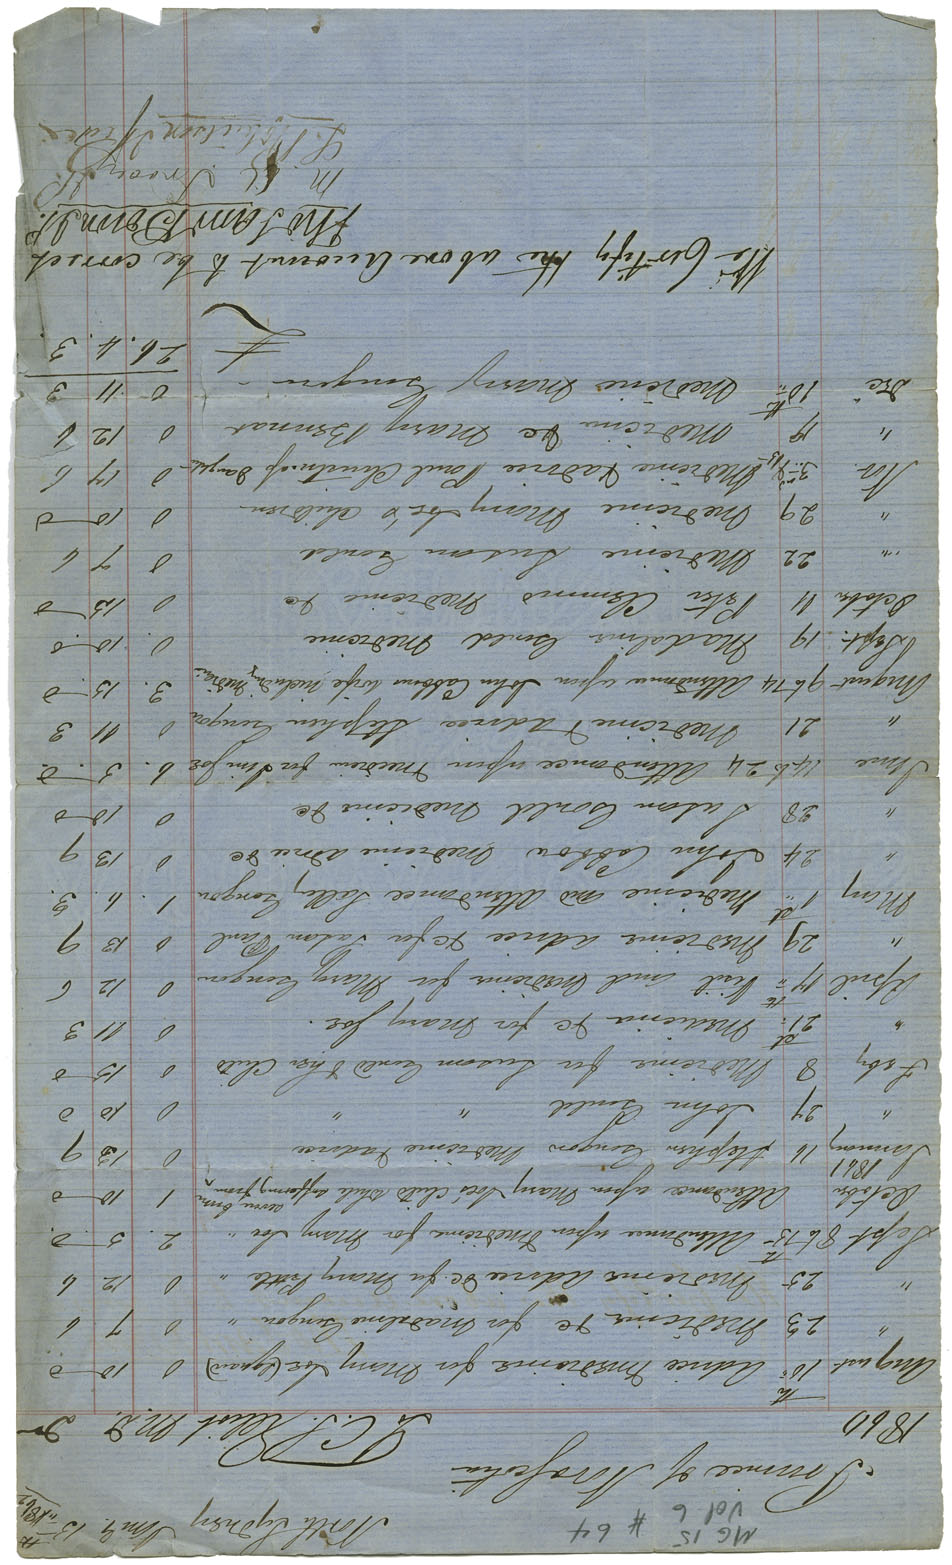 Expenses accrued during 1861 and 1862 for medical attendance on the Mi'kmaq.